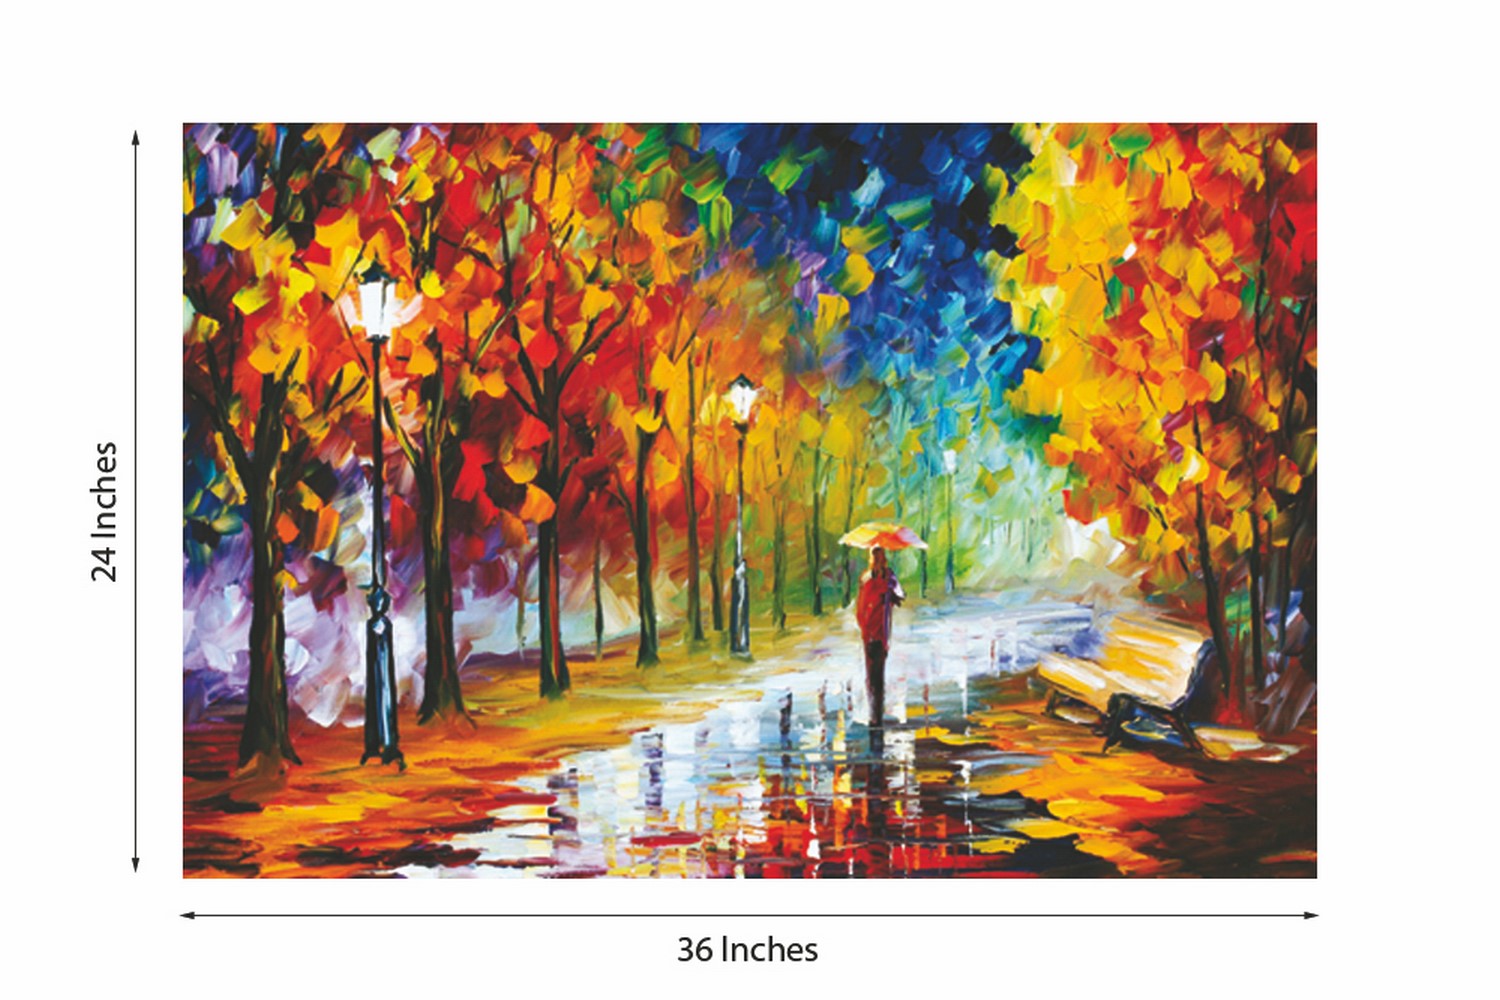 Artistic Rain View Design Self Adhesive Sparkle Coated Painting without frame 2